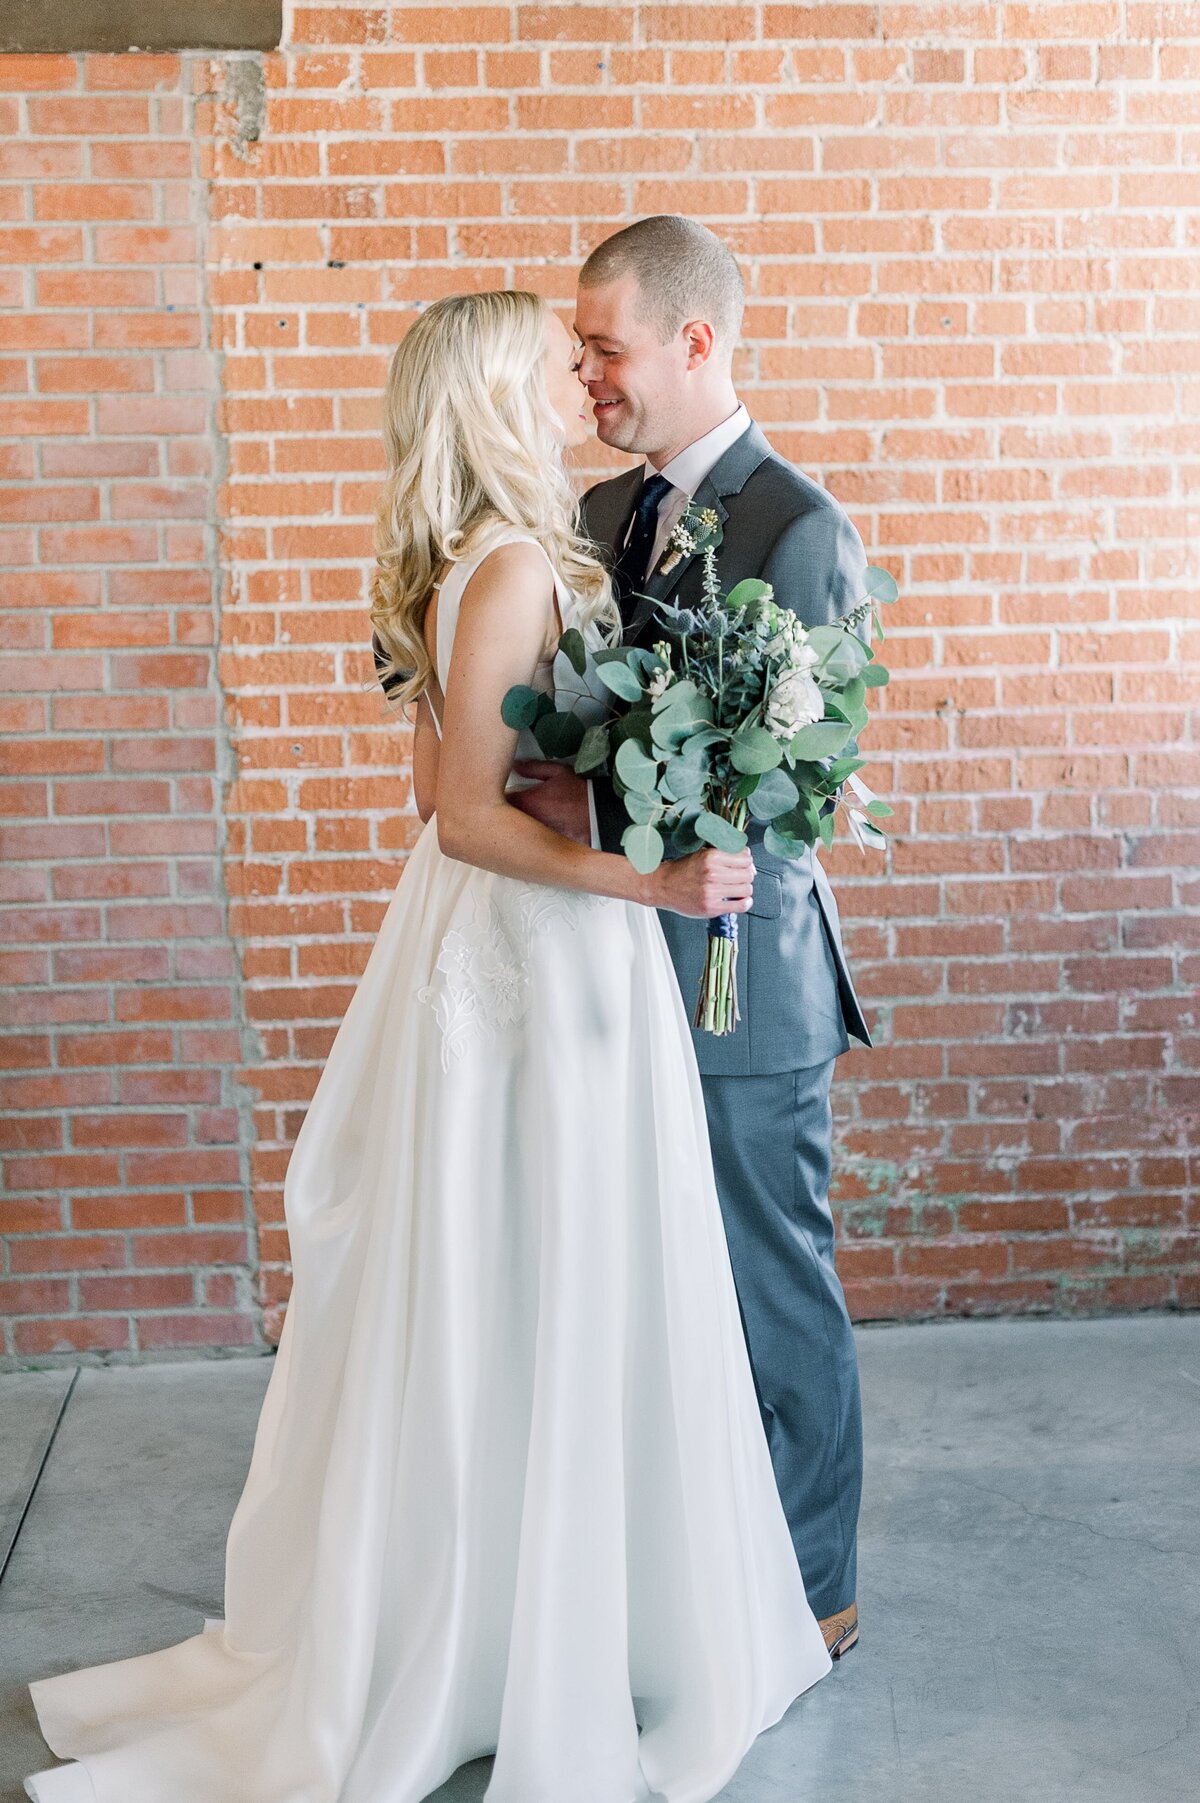 Warehouse-215-wedding-by-Leslie-Ann-Photography-00016